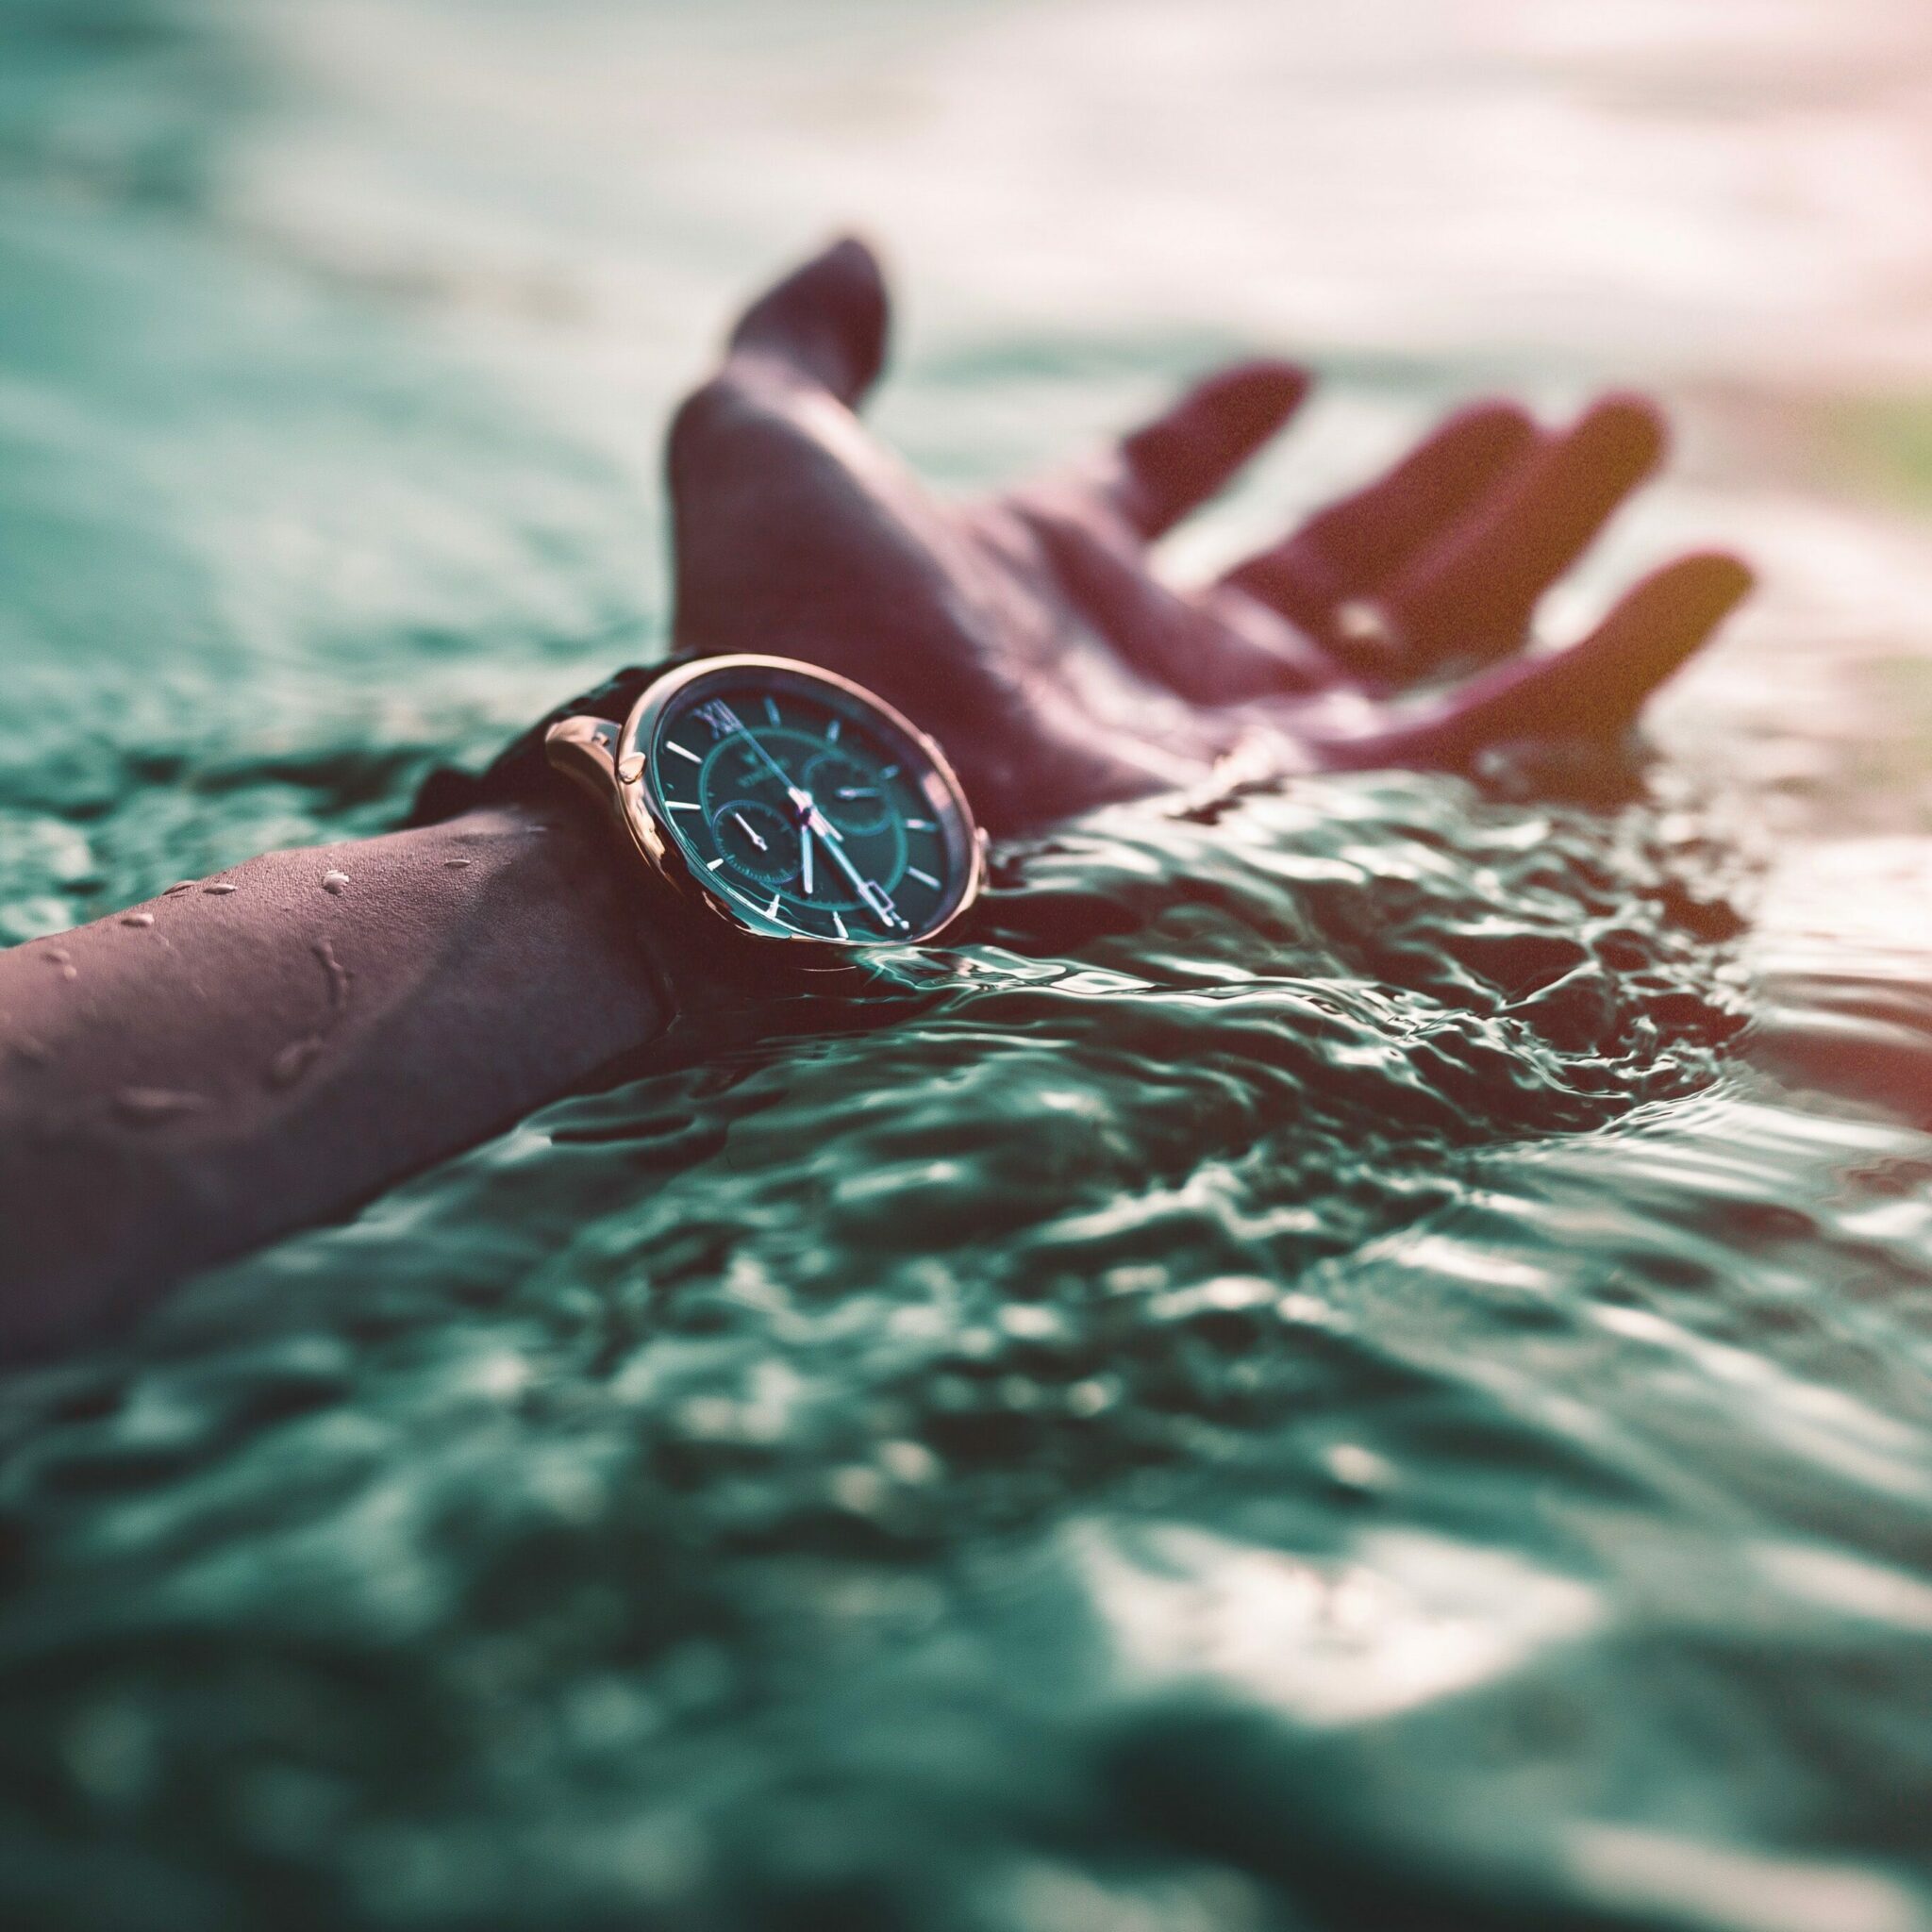 A waterproof watch partially submerged in water. Check out our watch cleaning guide to find the best way to clean your waterproof watch.